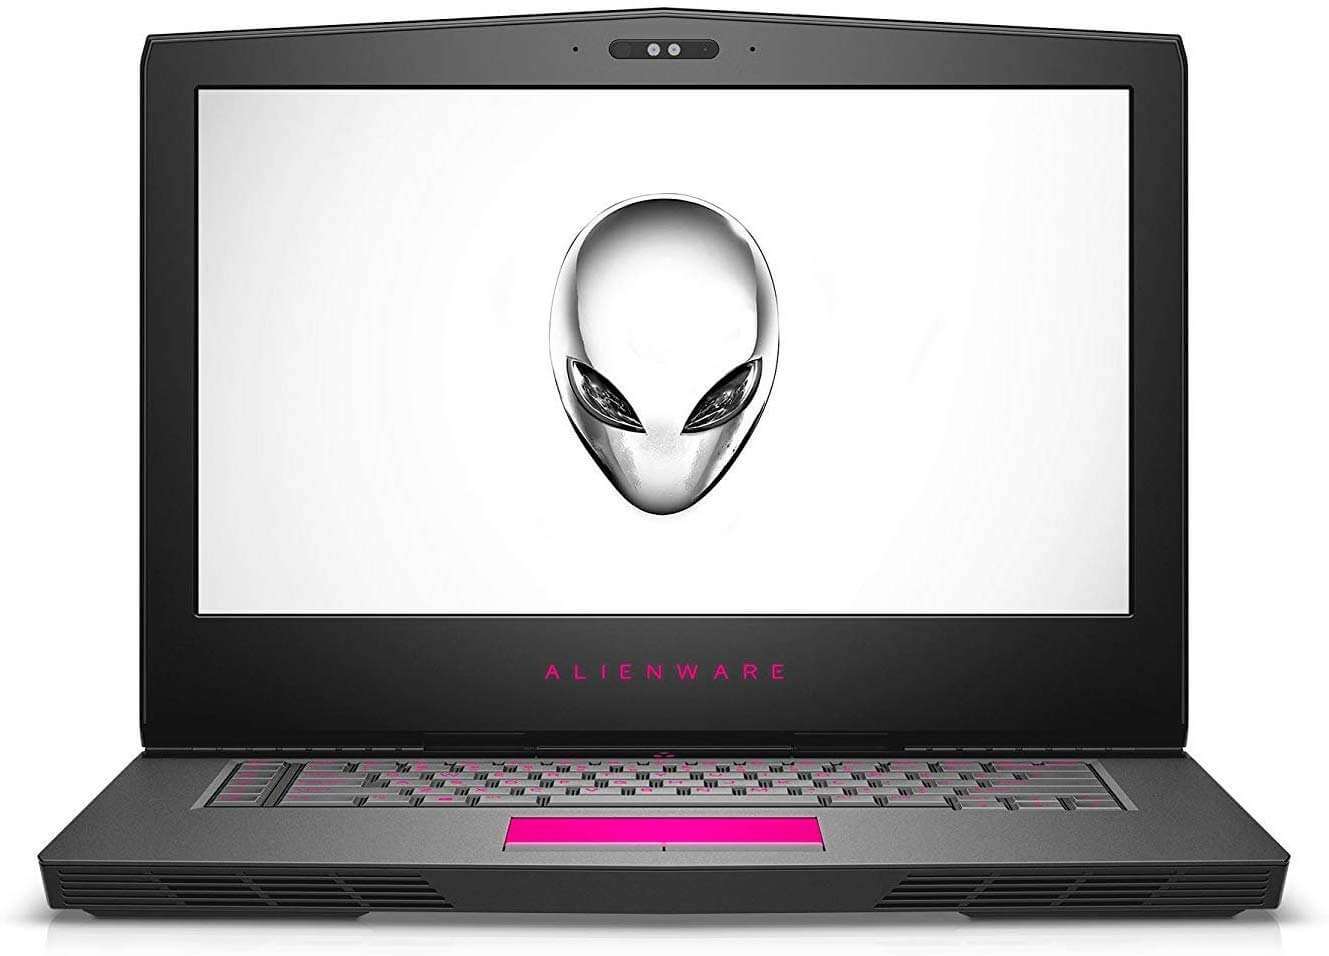 DELL Alienware 15R3 Notebook With 15.6-Inch Display, Core i7 Processor/16GB RAM/1TB HDD+128GB SSD Hybrid Drive/8GB NVIDIA GeForce GTX 1070 Graphics Black